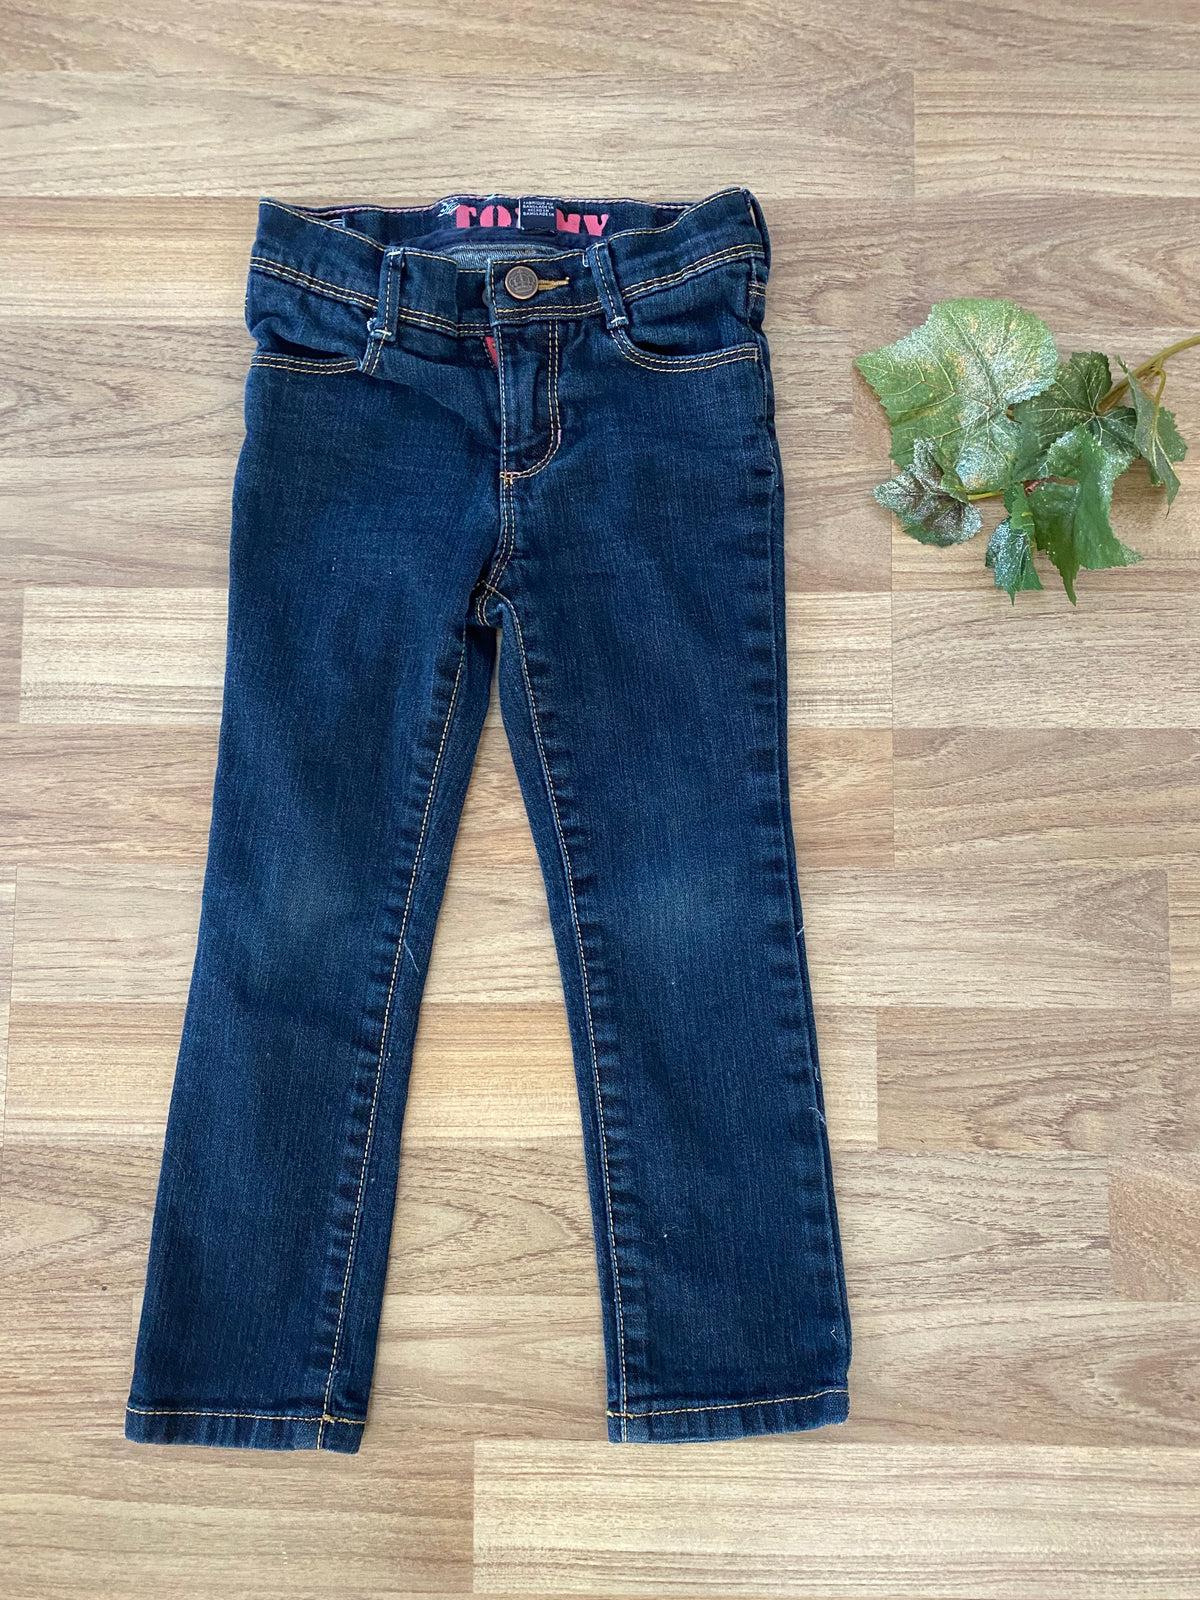 Jeans (Girls Size 4)